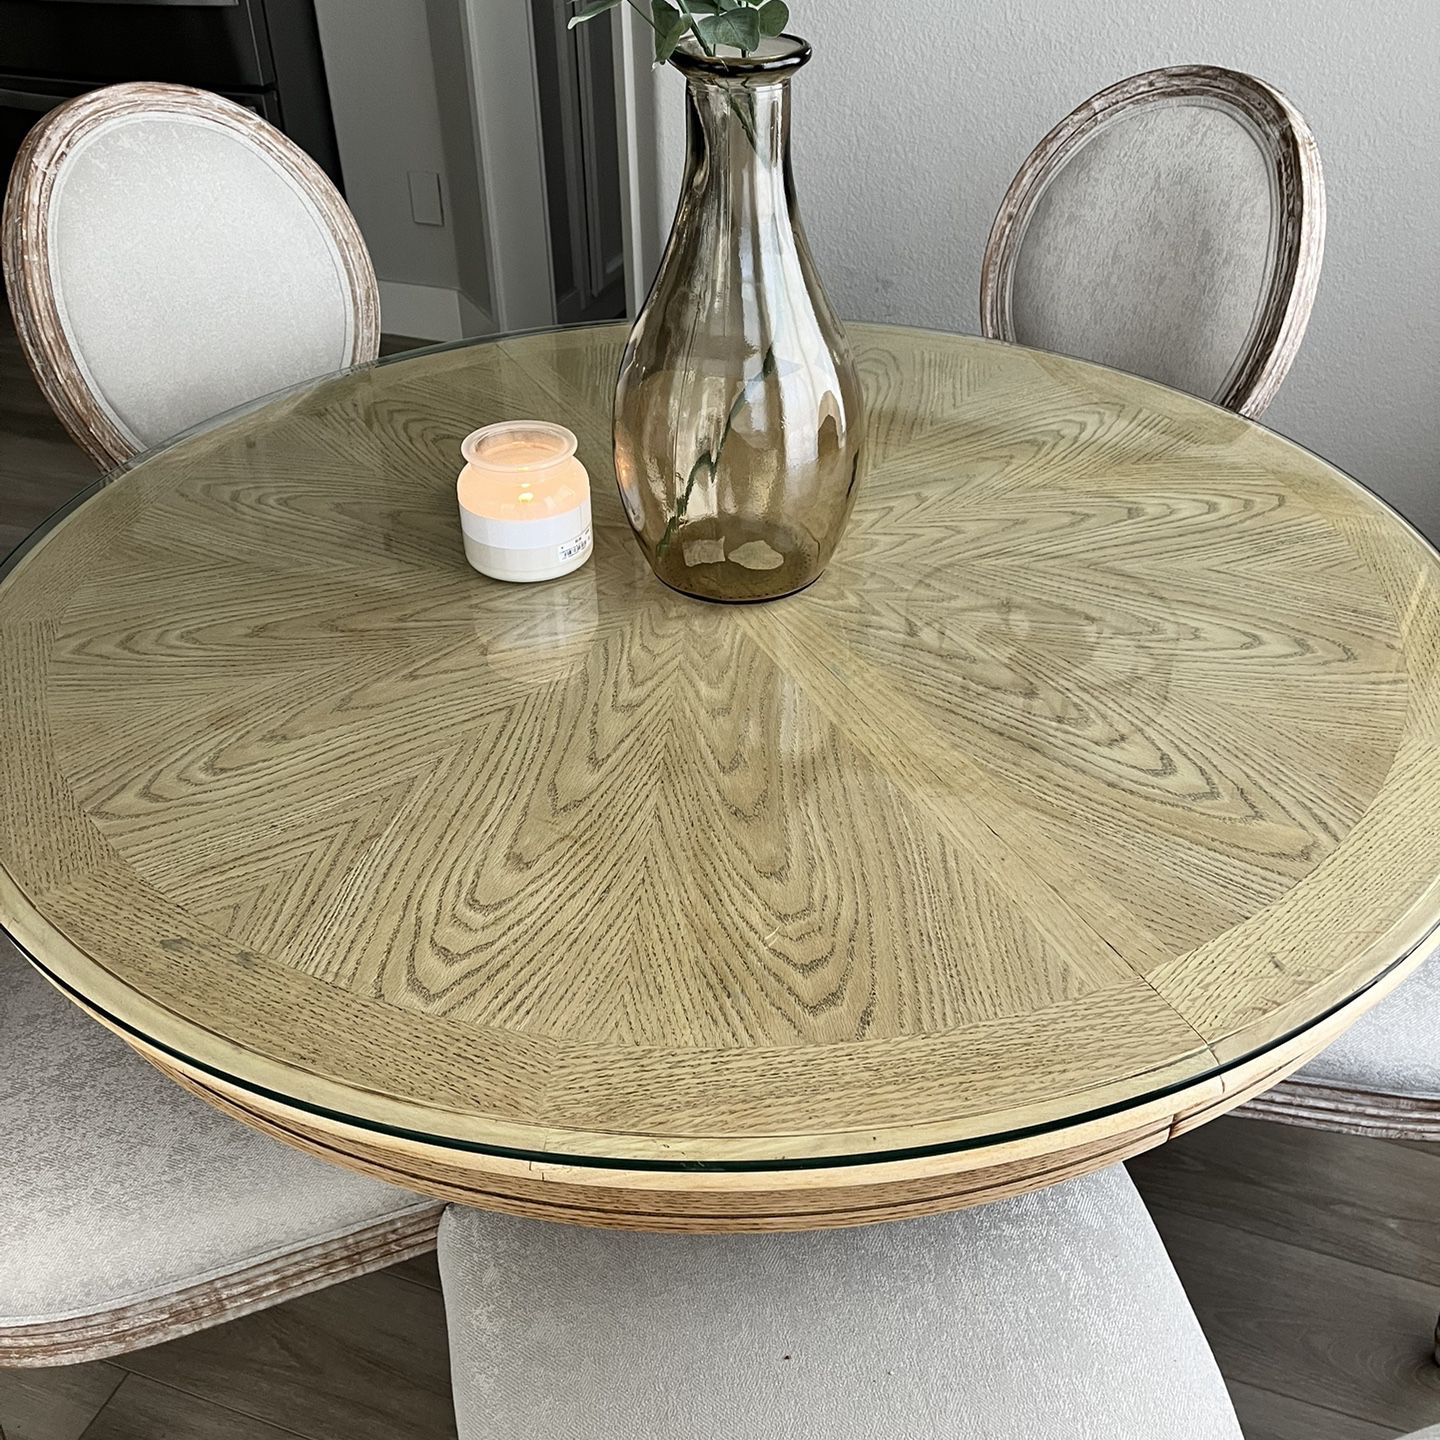 4 FOOT LONG GLASS ROUND PIECE FOR TABLE TOP